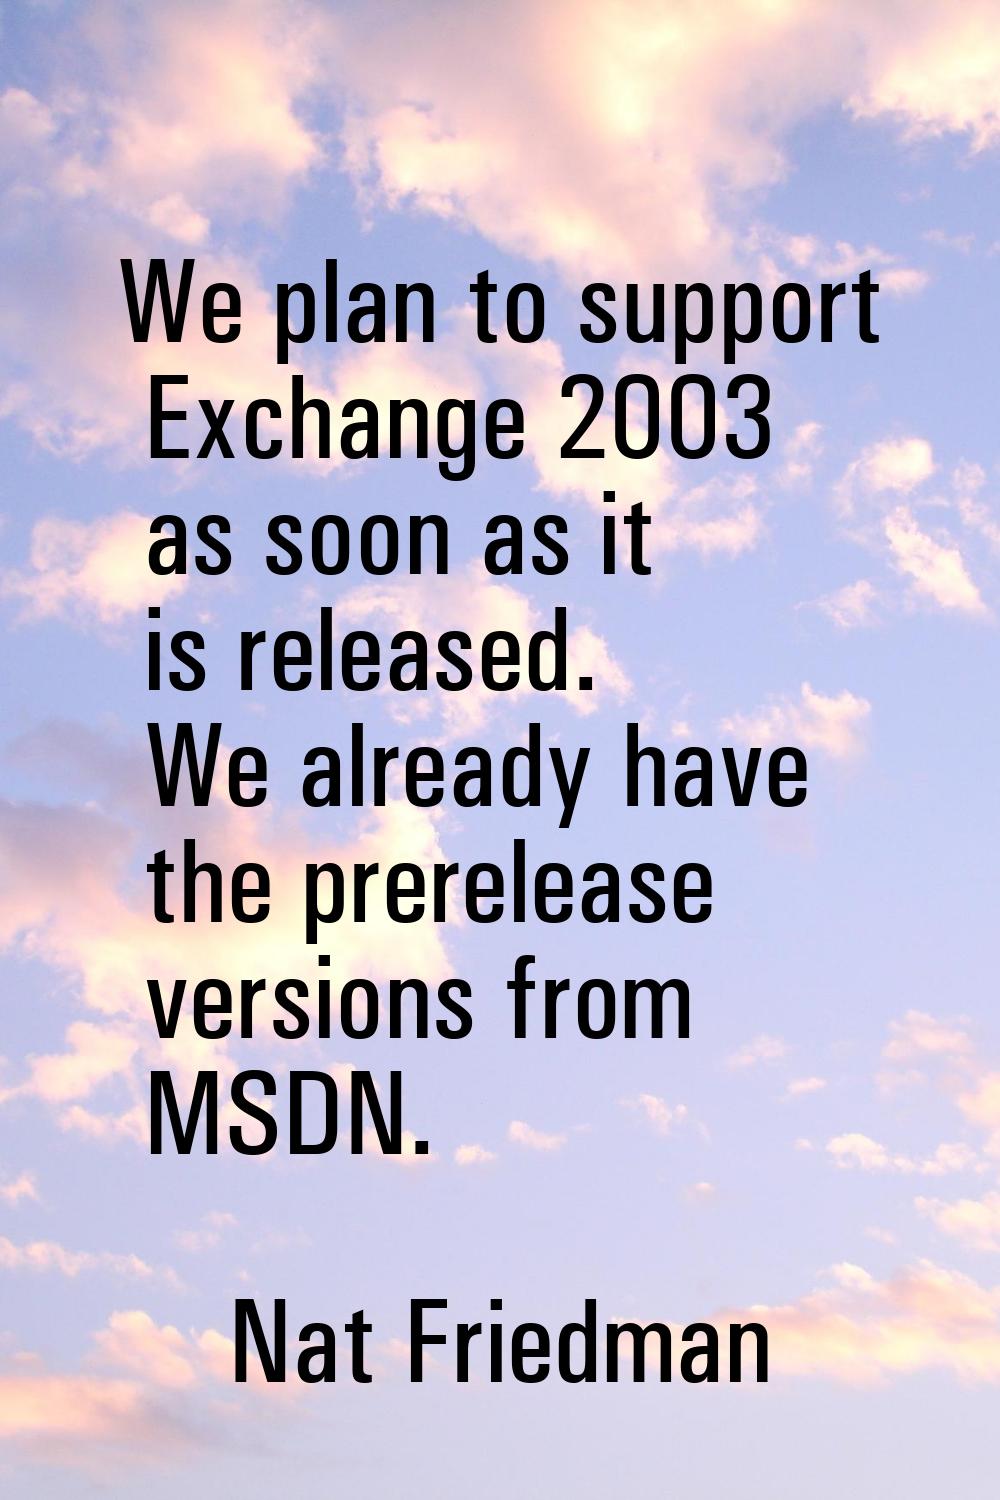 We plan to support Exchange 2003 as soon as it is released. We already have the prerelease versions